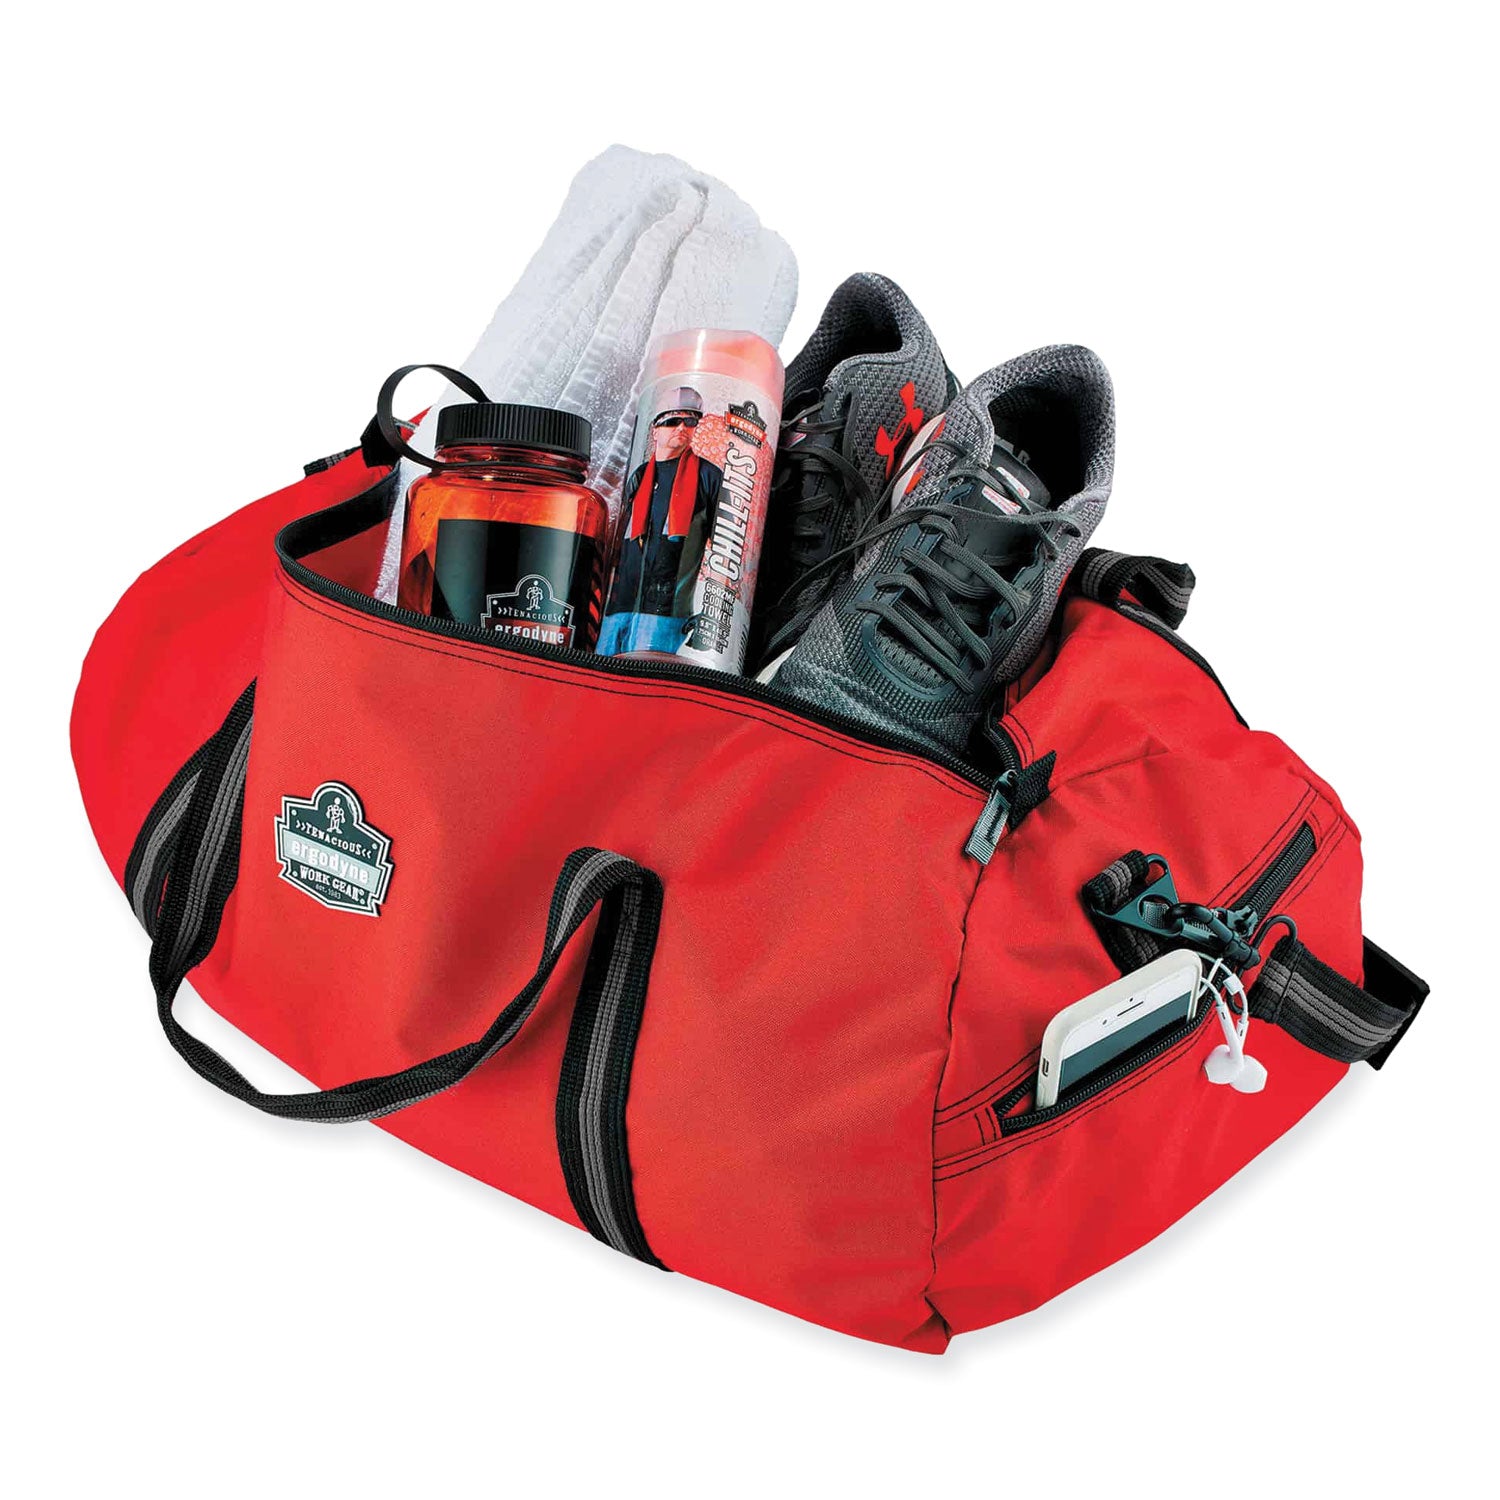 arsenal-5020-gear-duffel-bag-nylon-small-12-x-23-x-12-red-ships-in-1-3-business-days_ego13020 - 2